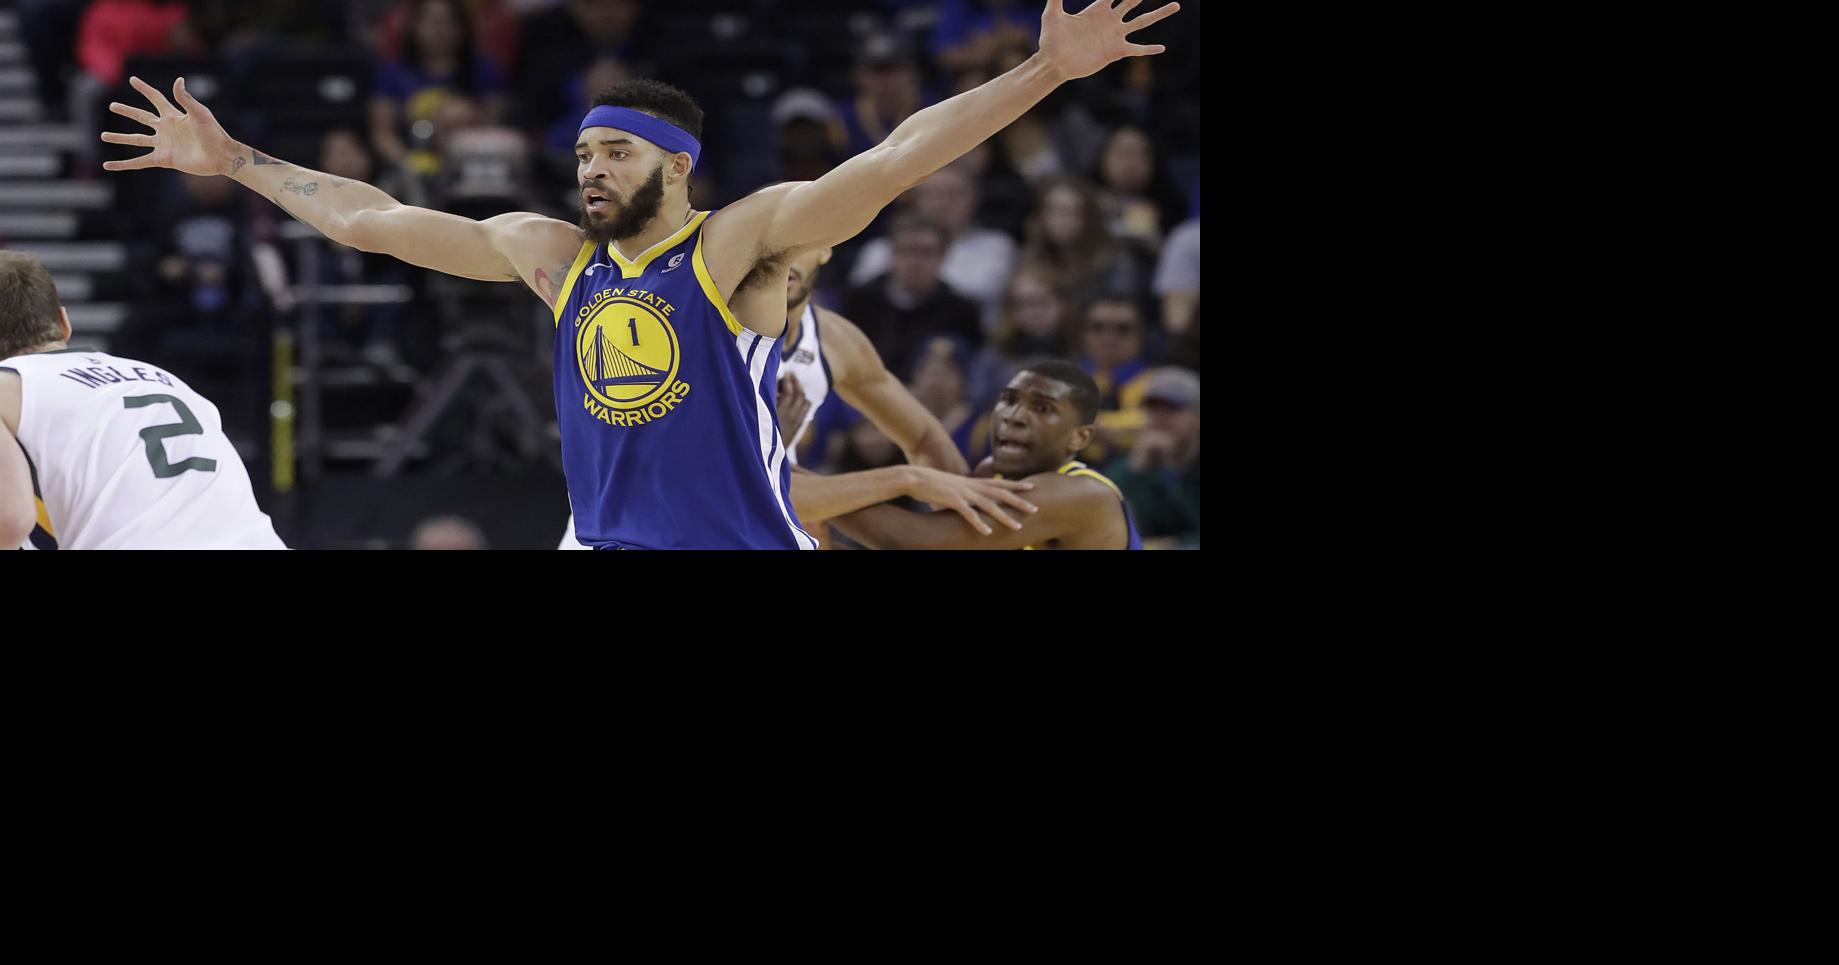 JaVale McGee: 5 facts on the Lakers, former Nevada basketball center